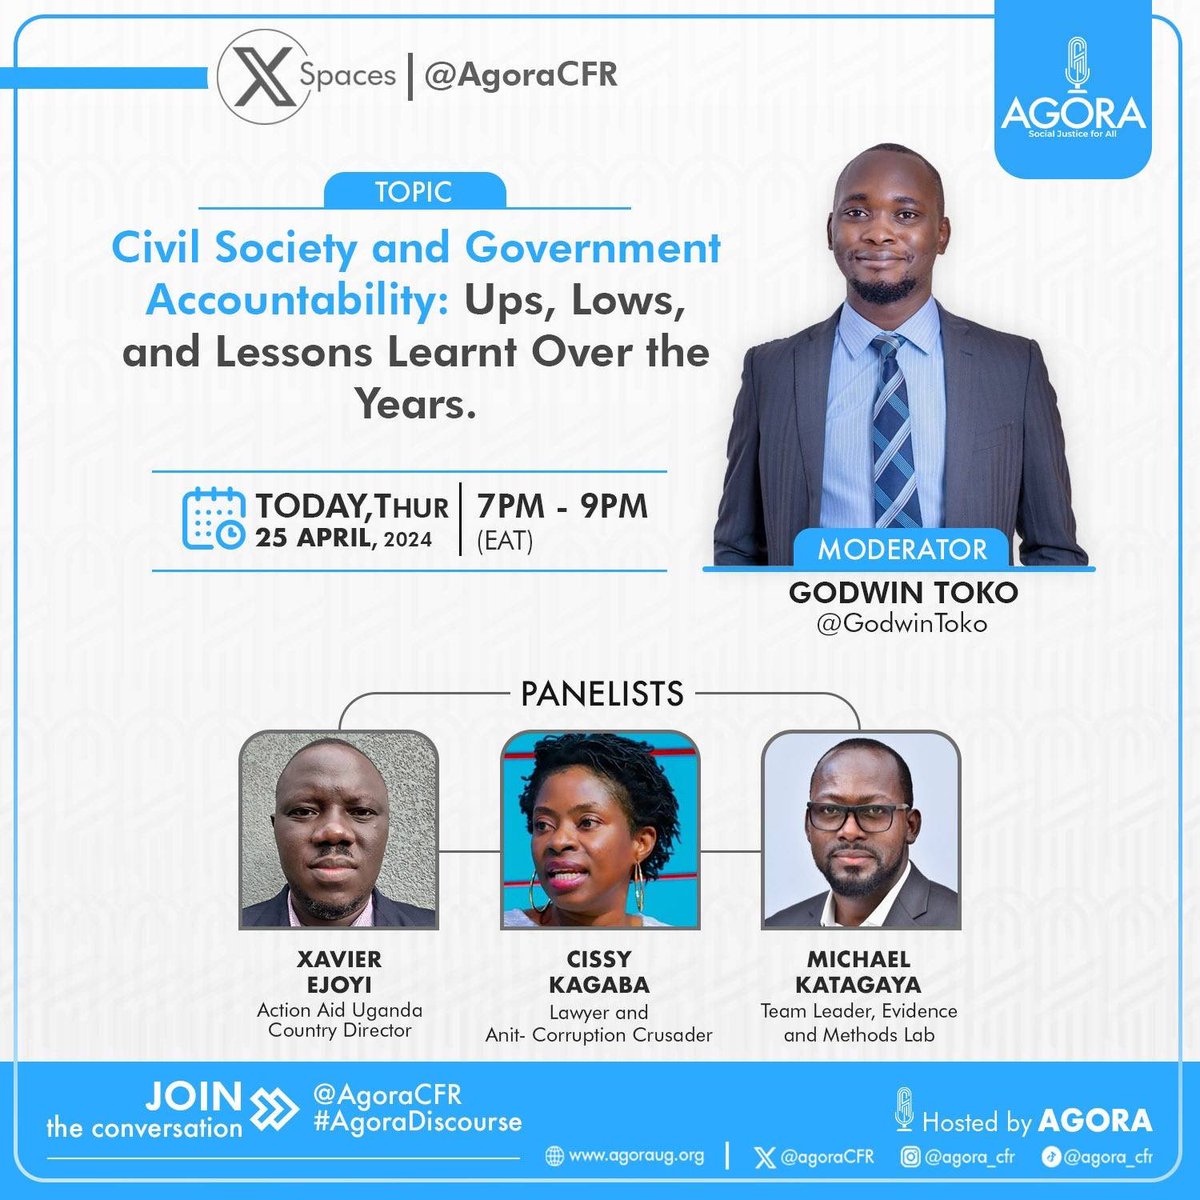 This evening on #AgoraDiscourse @GodwinTOKO will host @ActionAid Country Director @xmusema , reknown Anti-Corruption Crusader @cckagaba and @mkatagaya Team Leader at @evidence_method to discuss Civil Society and Government Accountability. Tune in.